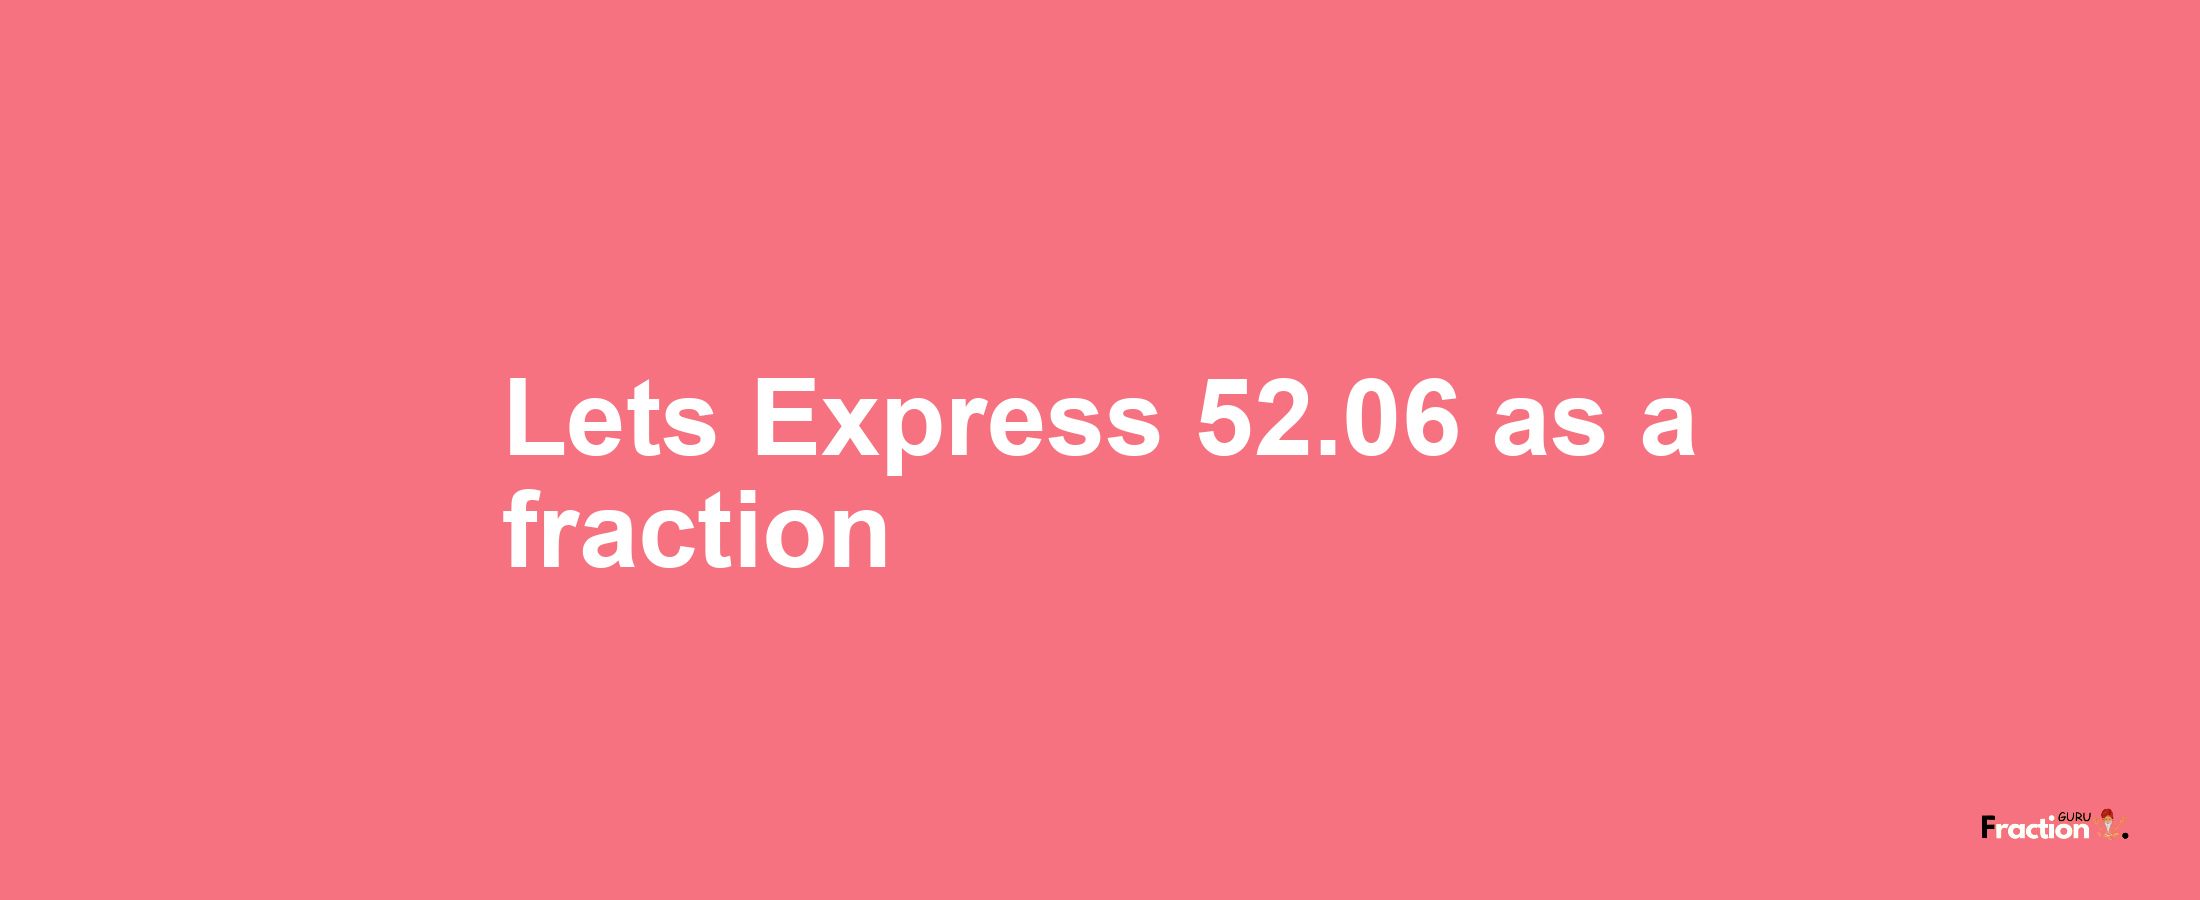 Lets Express 52.06 as afraction